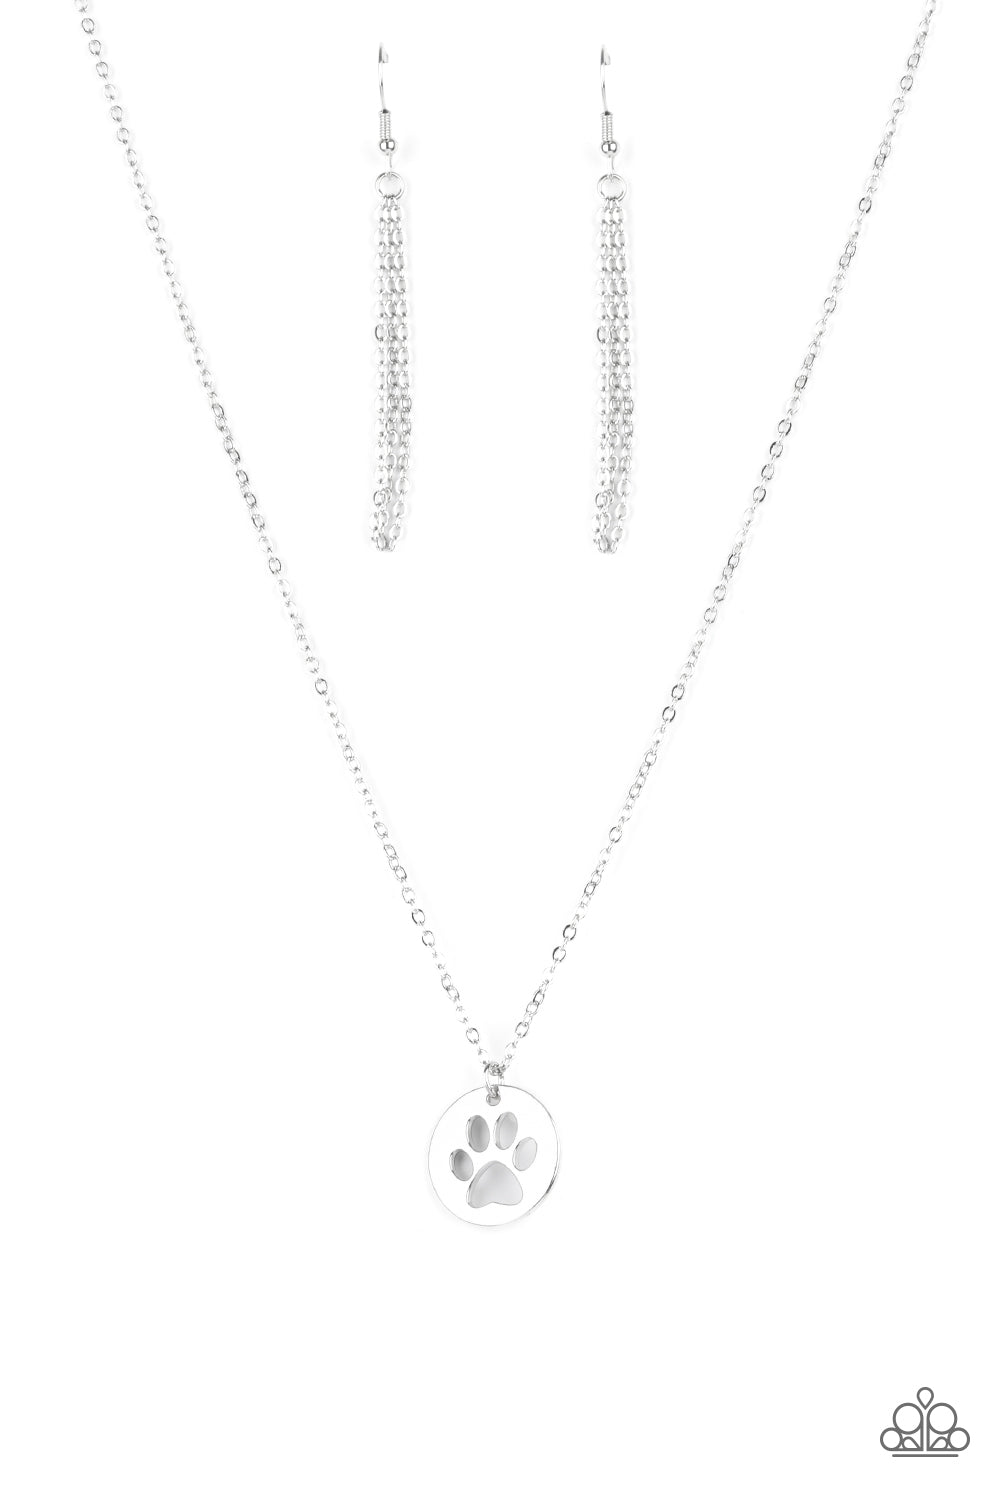 Think PAW-sitive - Silver Necklace